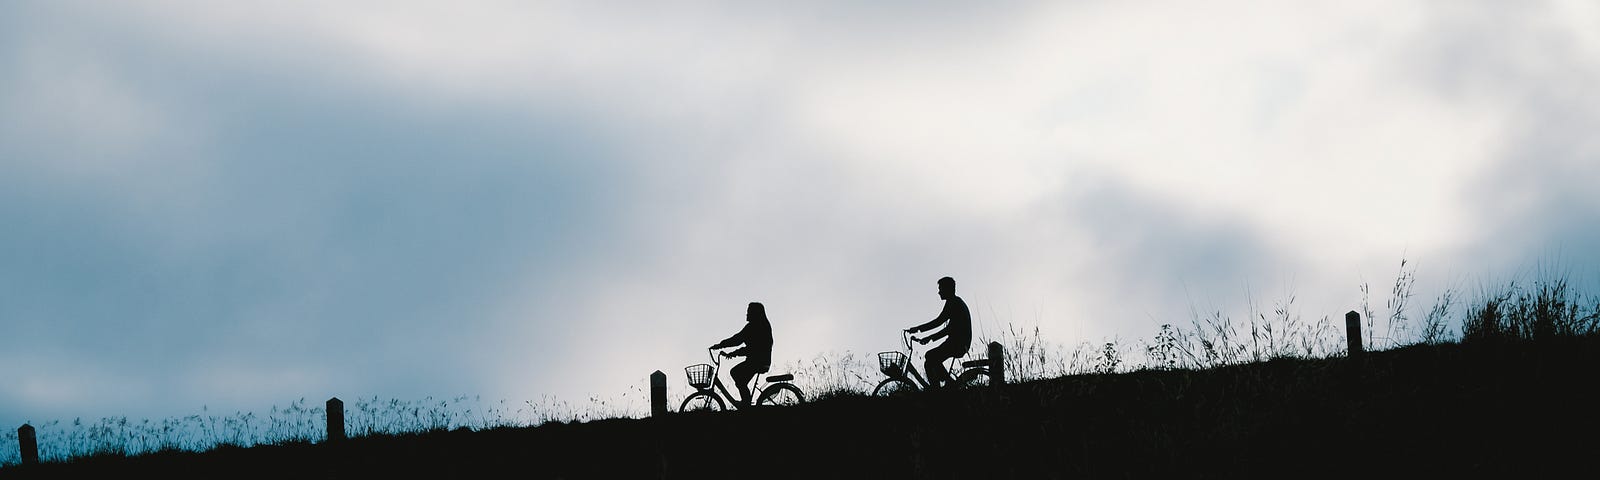 The silhouettes of two people riding bikes